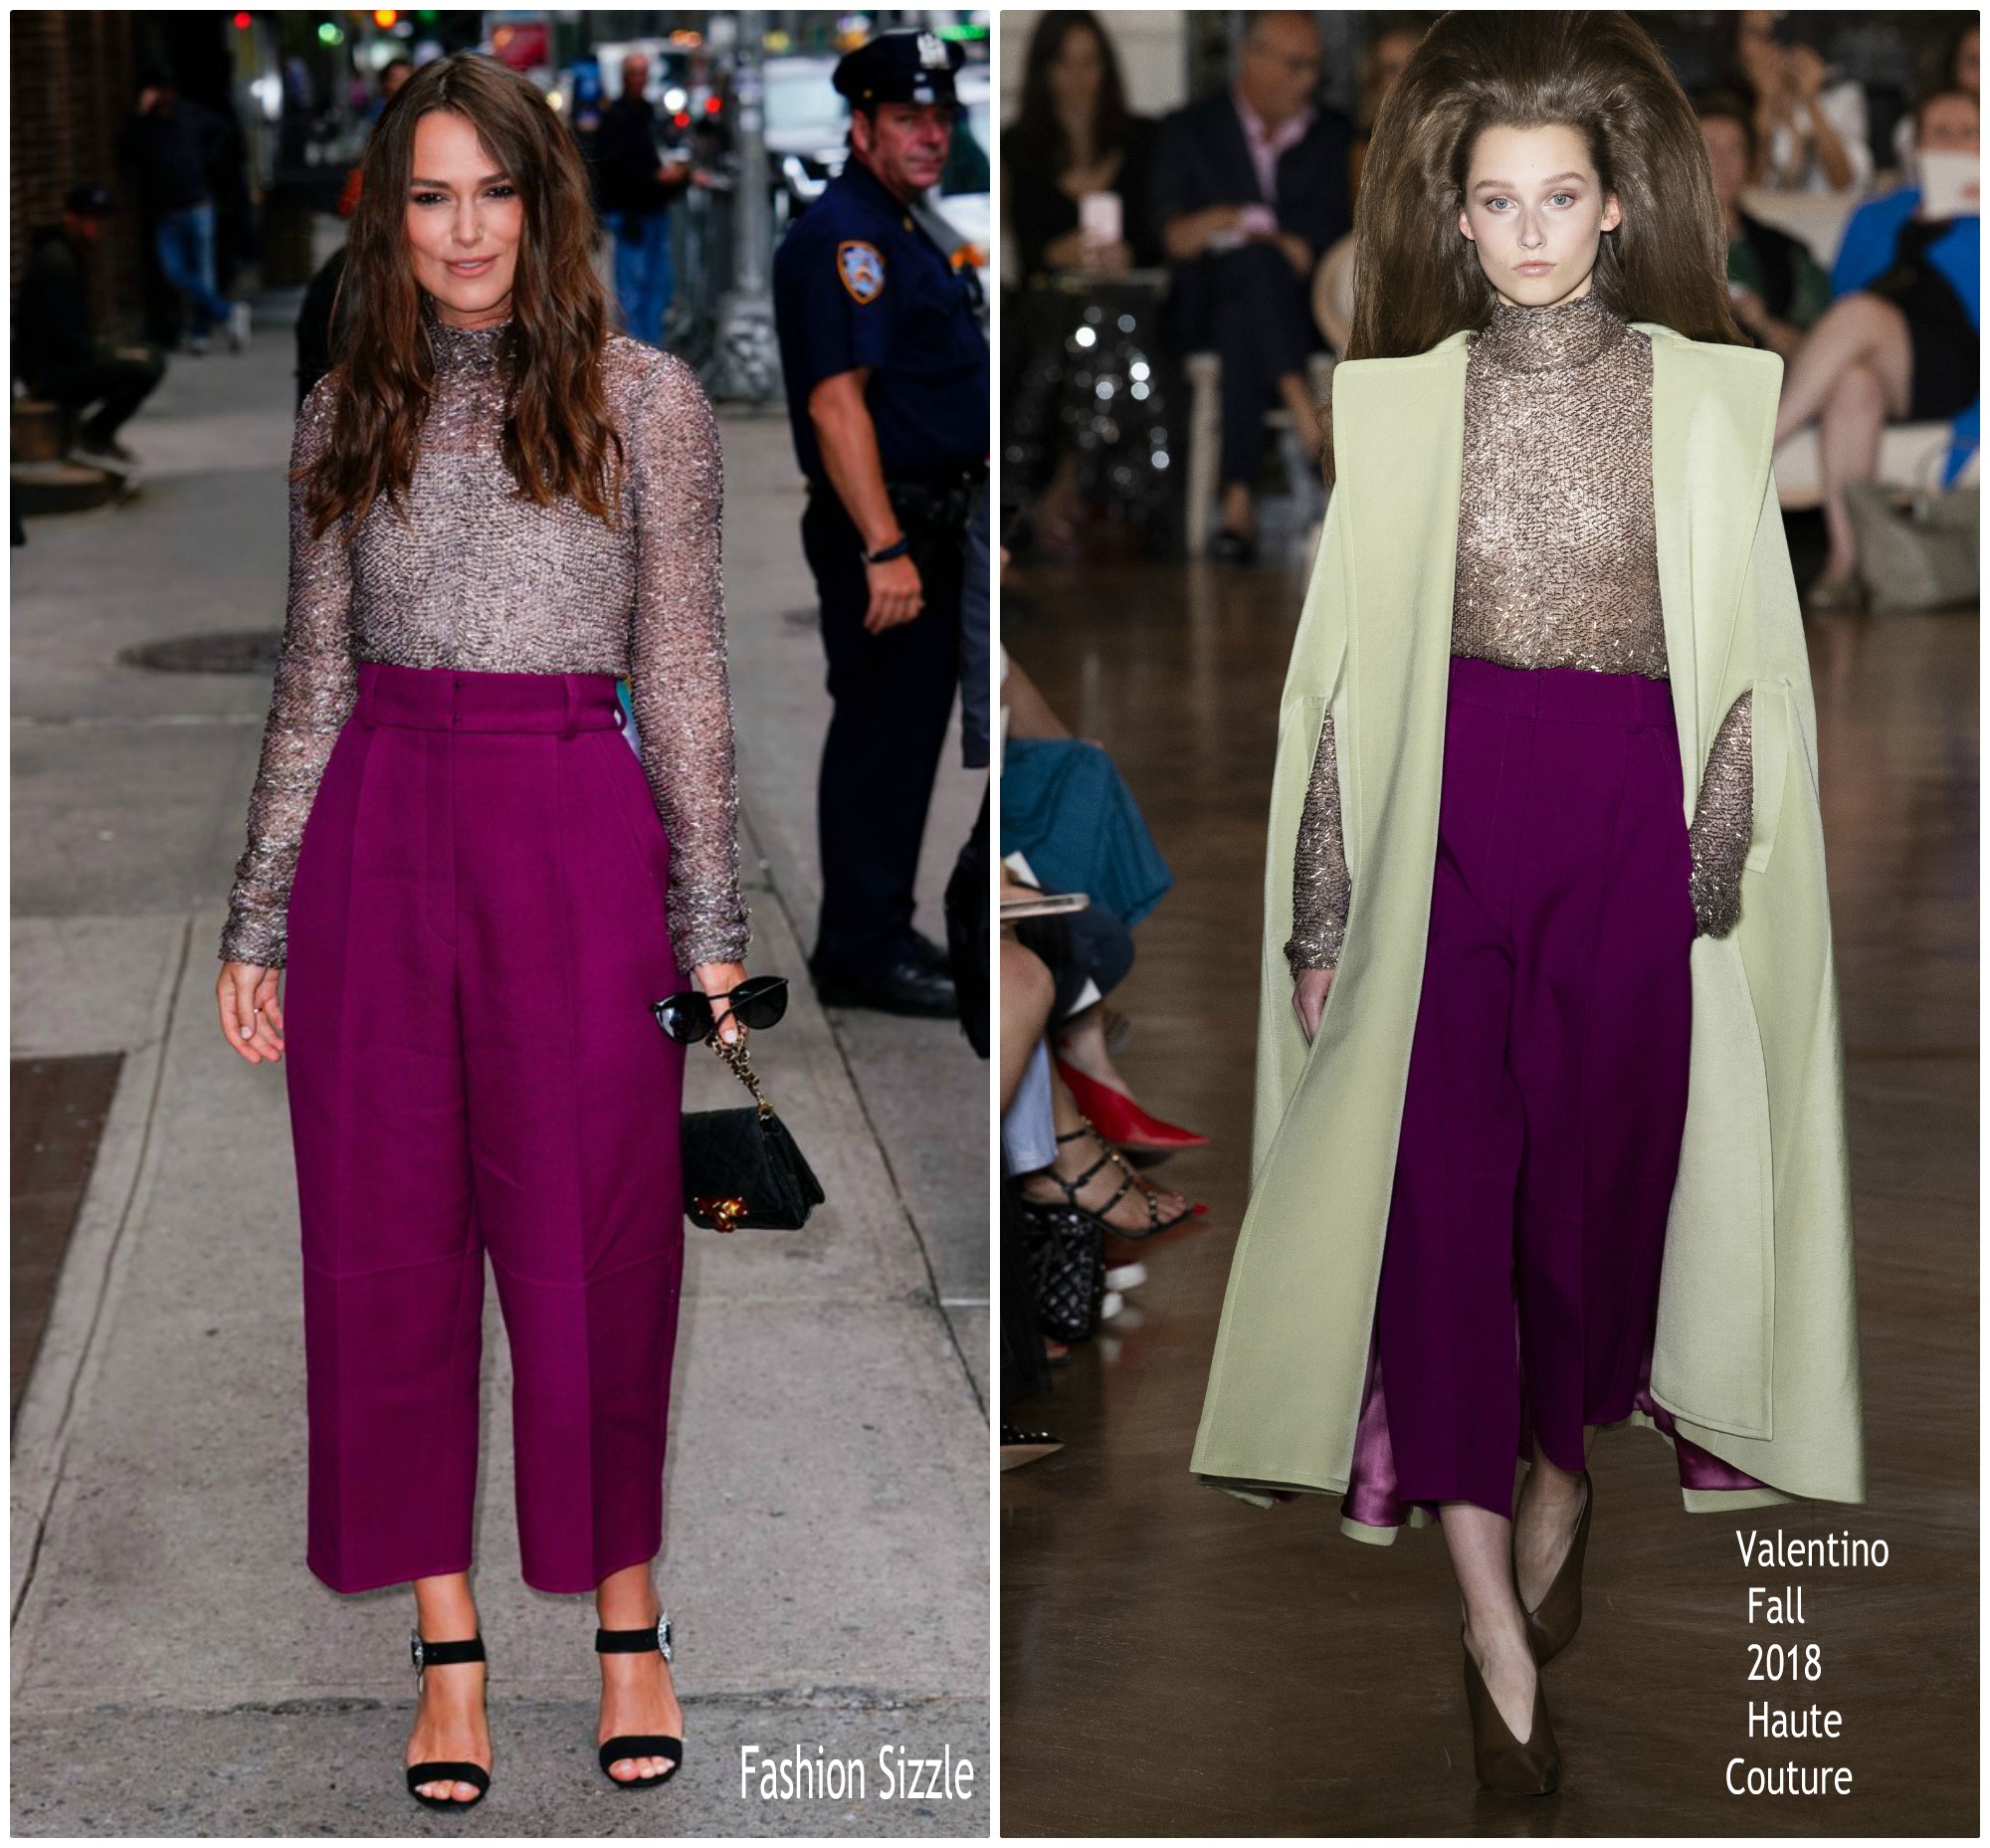 Keira Knightley in Valentino Haute Couture @ ‘The Late Show with Stephen Colbert’